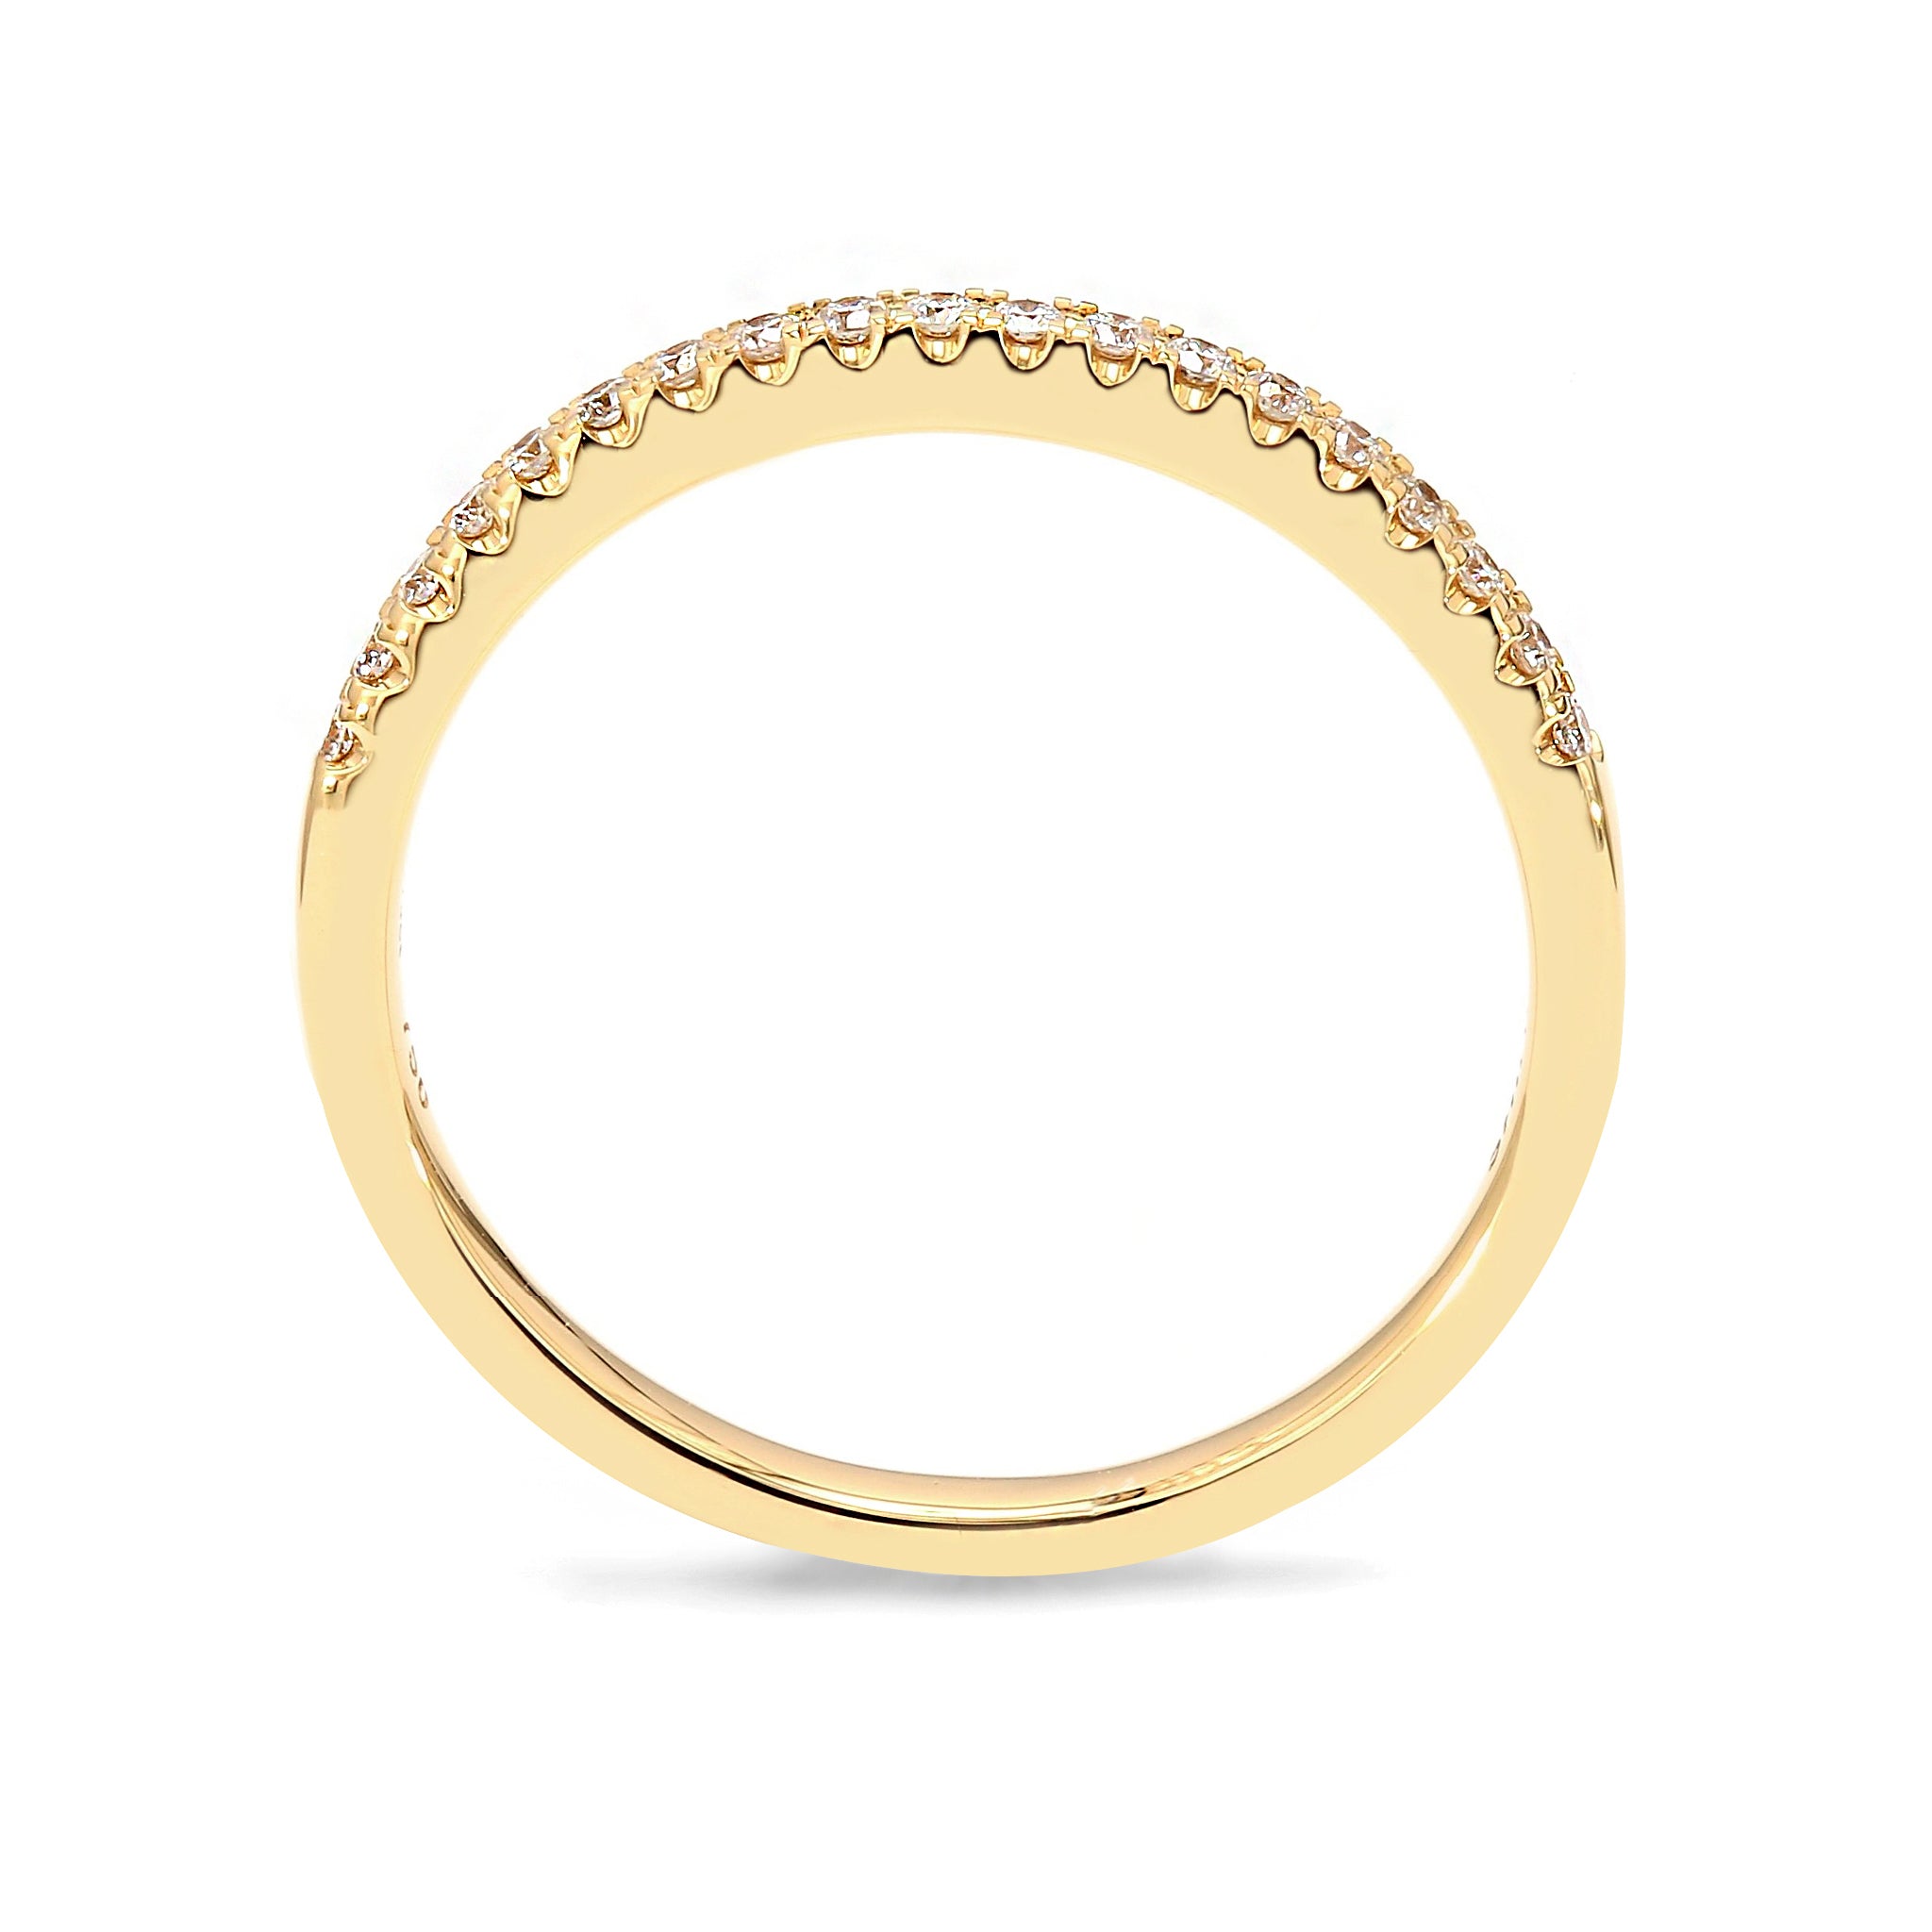 Shimansky - Ladies Diamond Wedding Band Crafted in 18K Yellow Gold